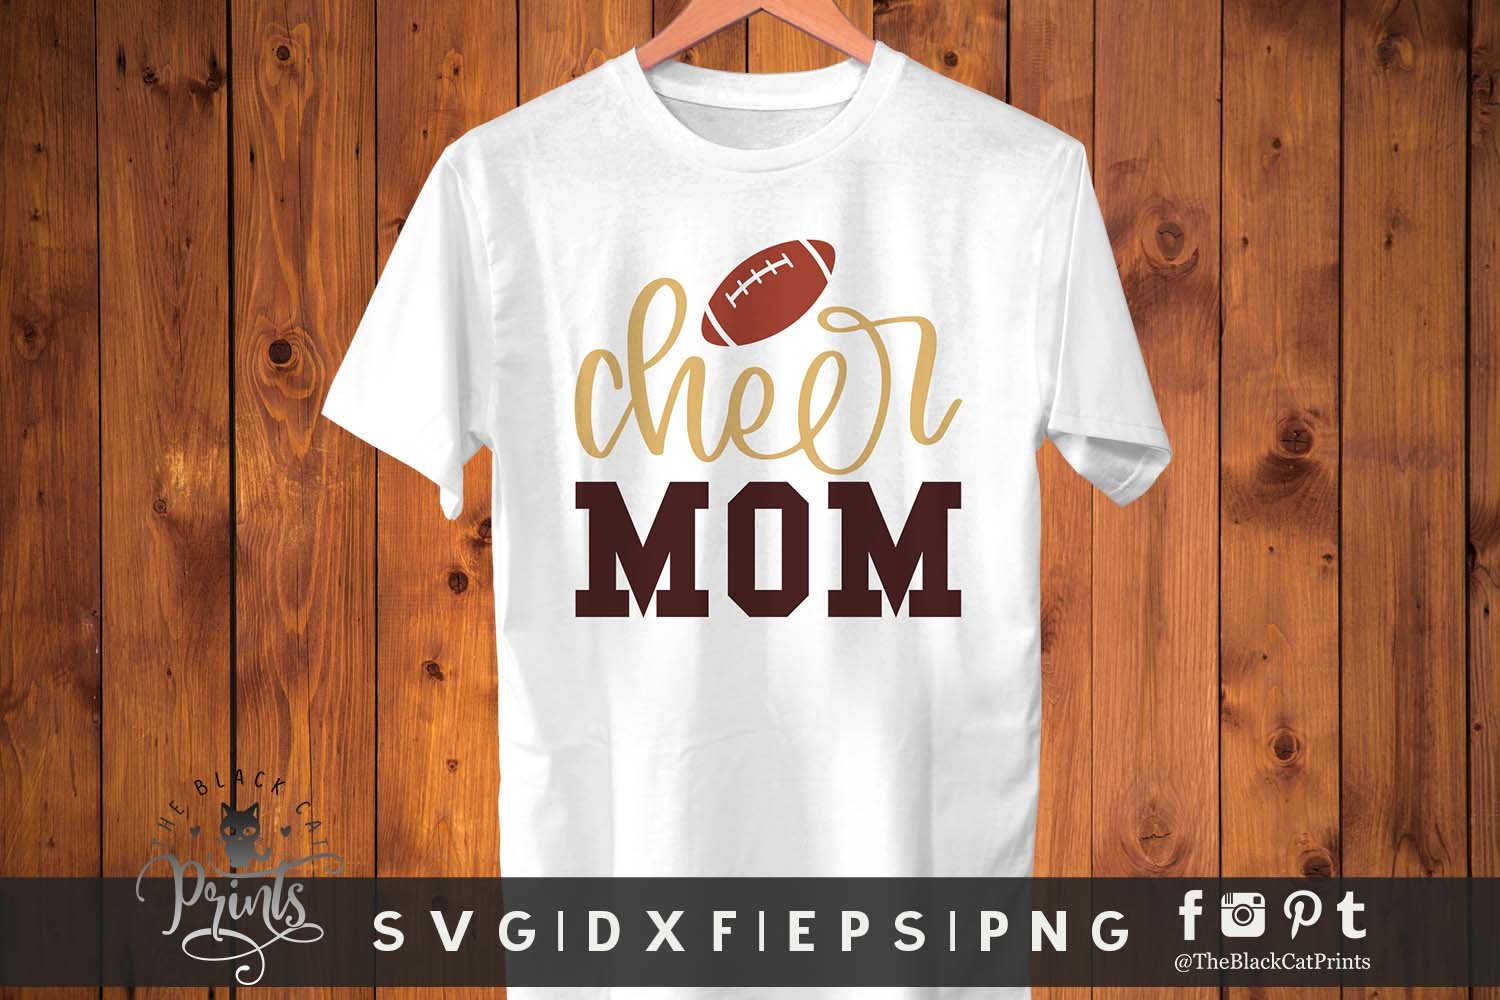 Cheer Mom SVG DXF EPS PNG preview image.